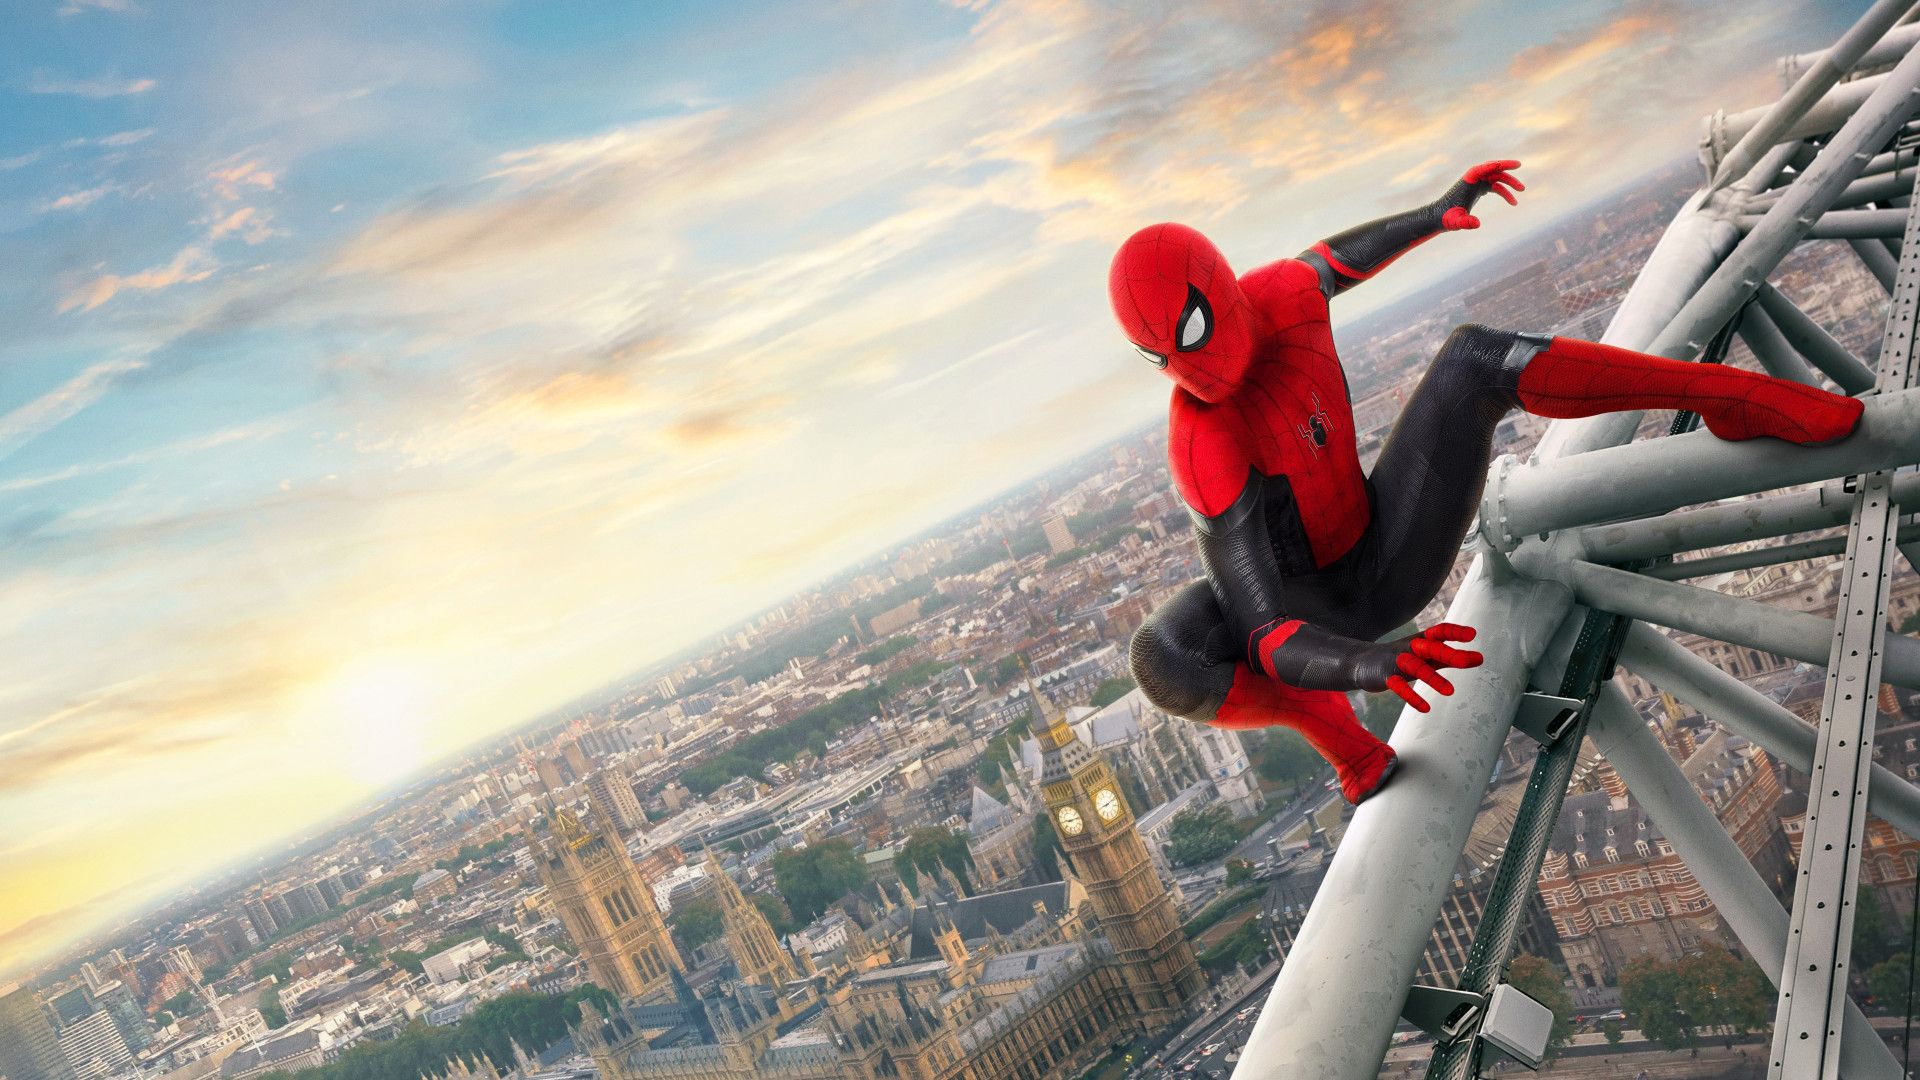 Spider Man: Far From Home 2019 wallpaper 1920x1080